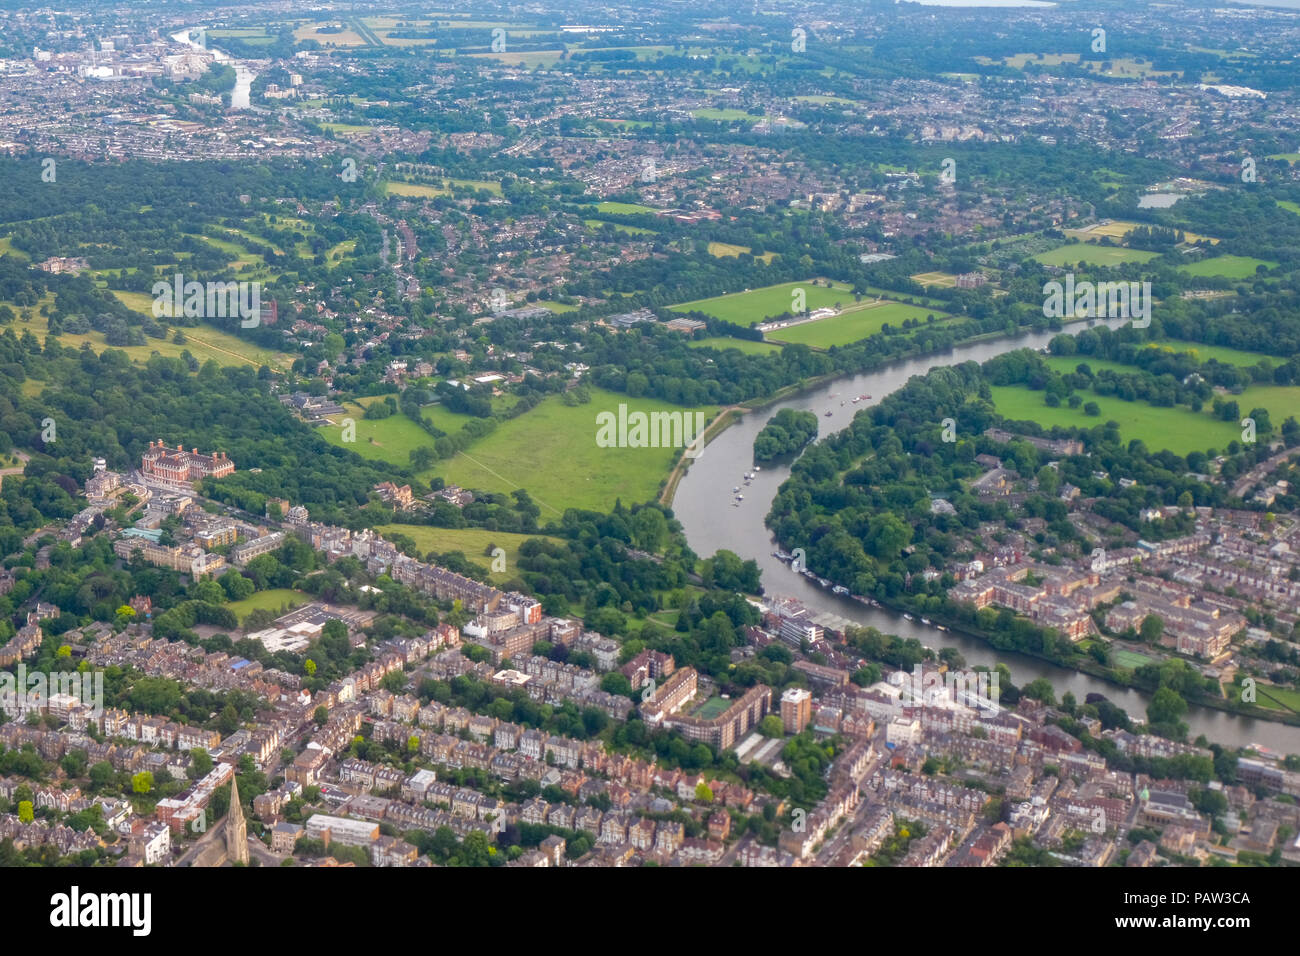 View of bend in the River Thames at Richmond in Southwest London from a plane Stock Photo